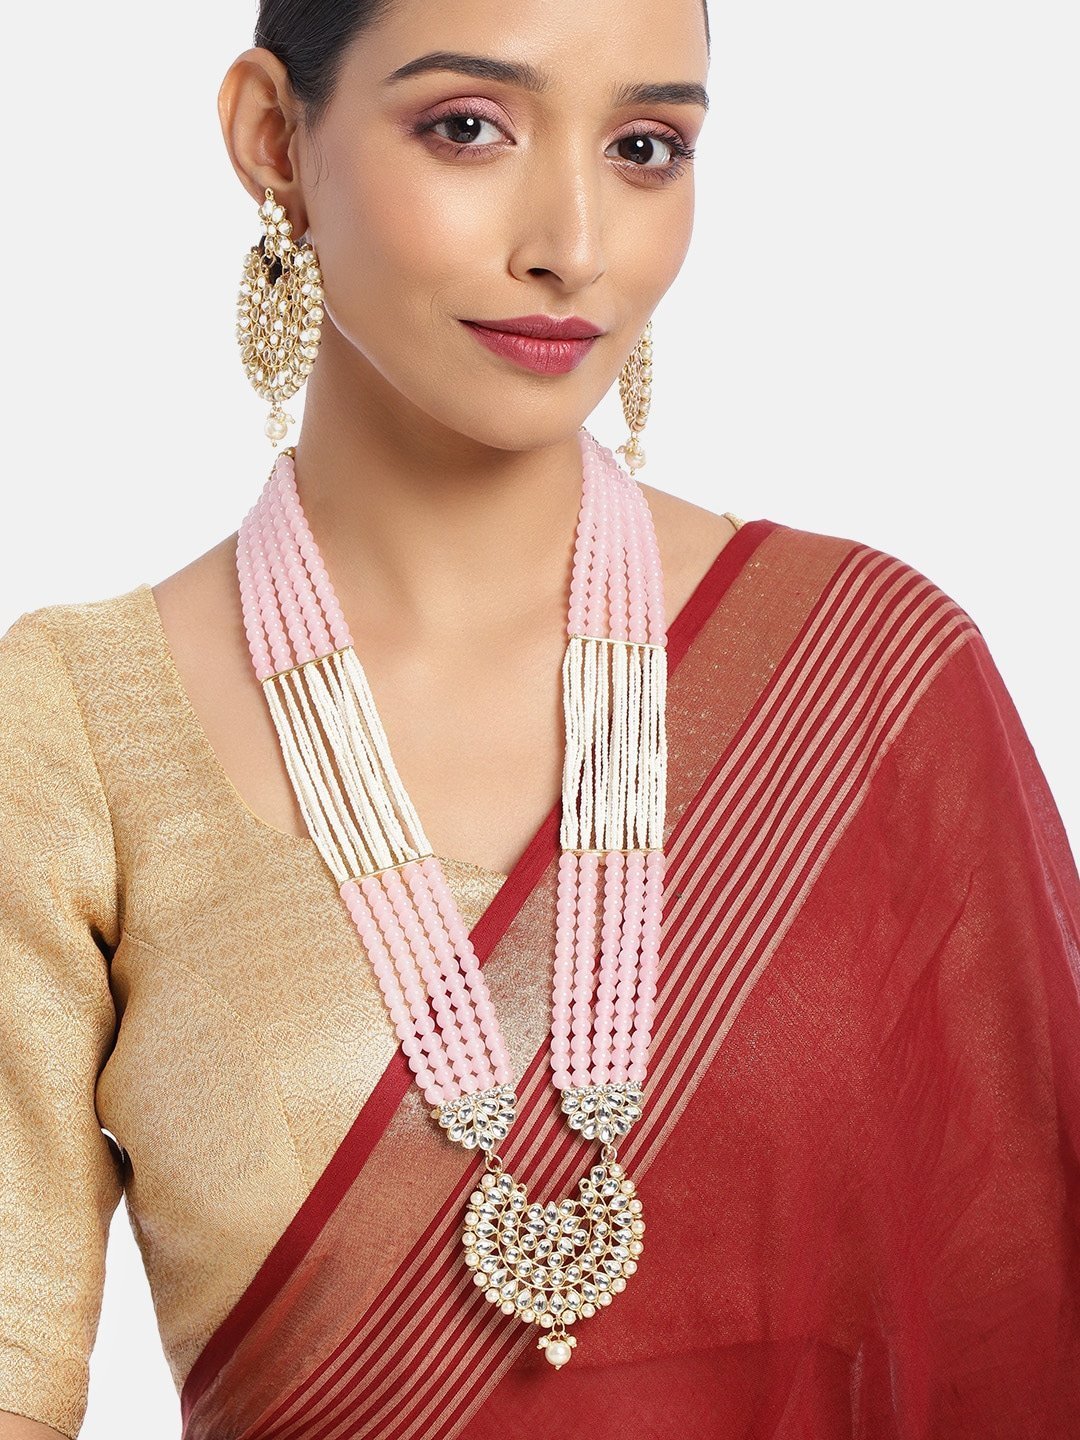 Women's Gold Plated Pink Ethnic 5 Layer Kundan Pearl Studded Long Necklace Set - i jewels